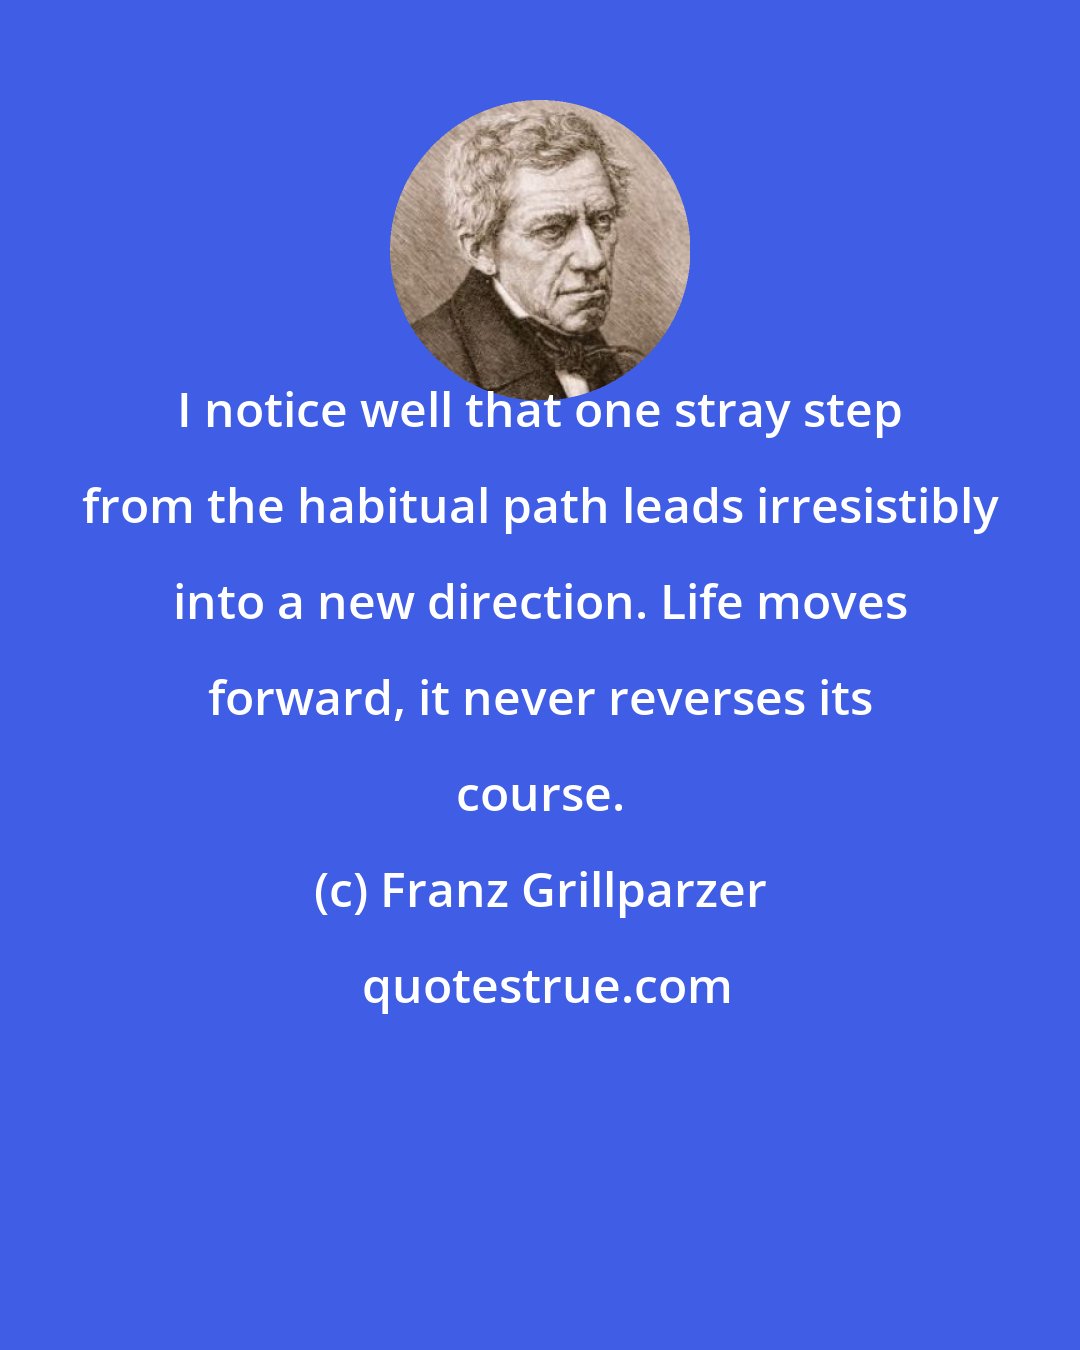 Franz Grillparzer: I notice well that one stray step from the habitual path leads irresistibly into a new direction. Life moves forward, it never reverses its course.